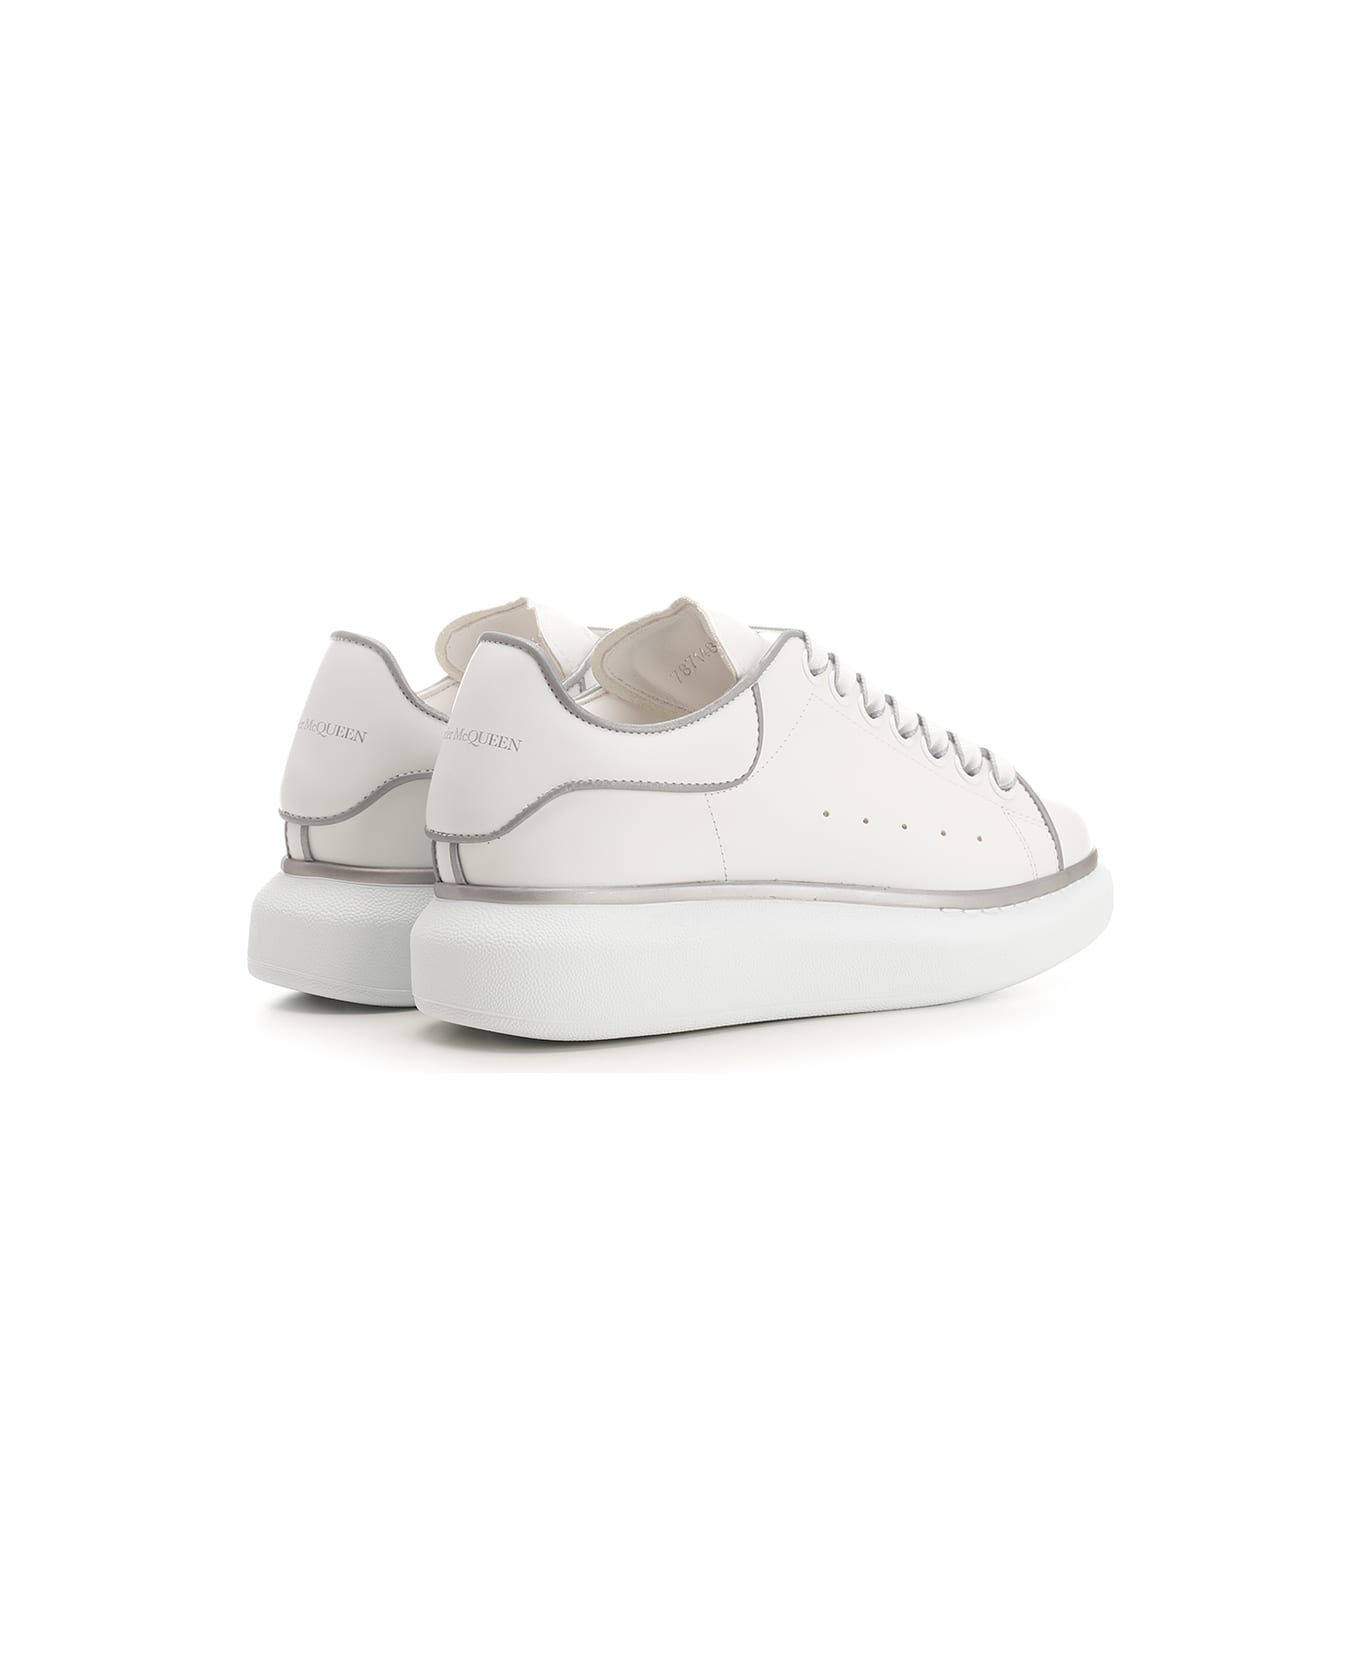 Alexander McQueen White Oversized Sneakers With Silver Piping - White